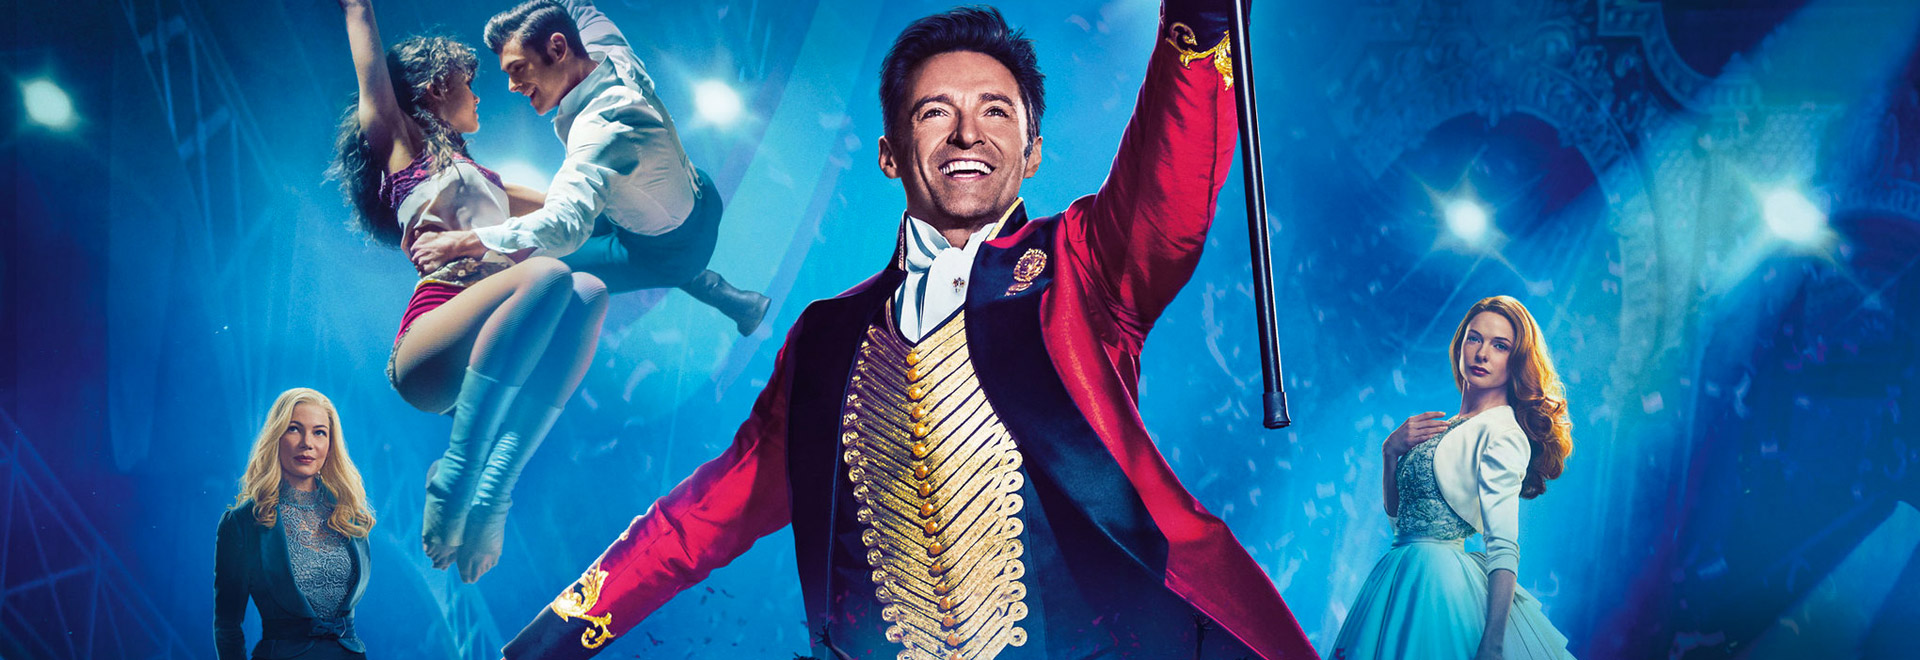 The Greatest Showman - An aggressively awful musical experience